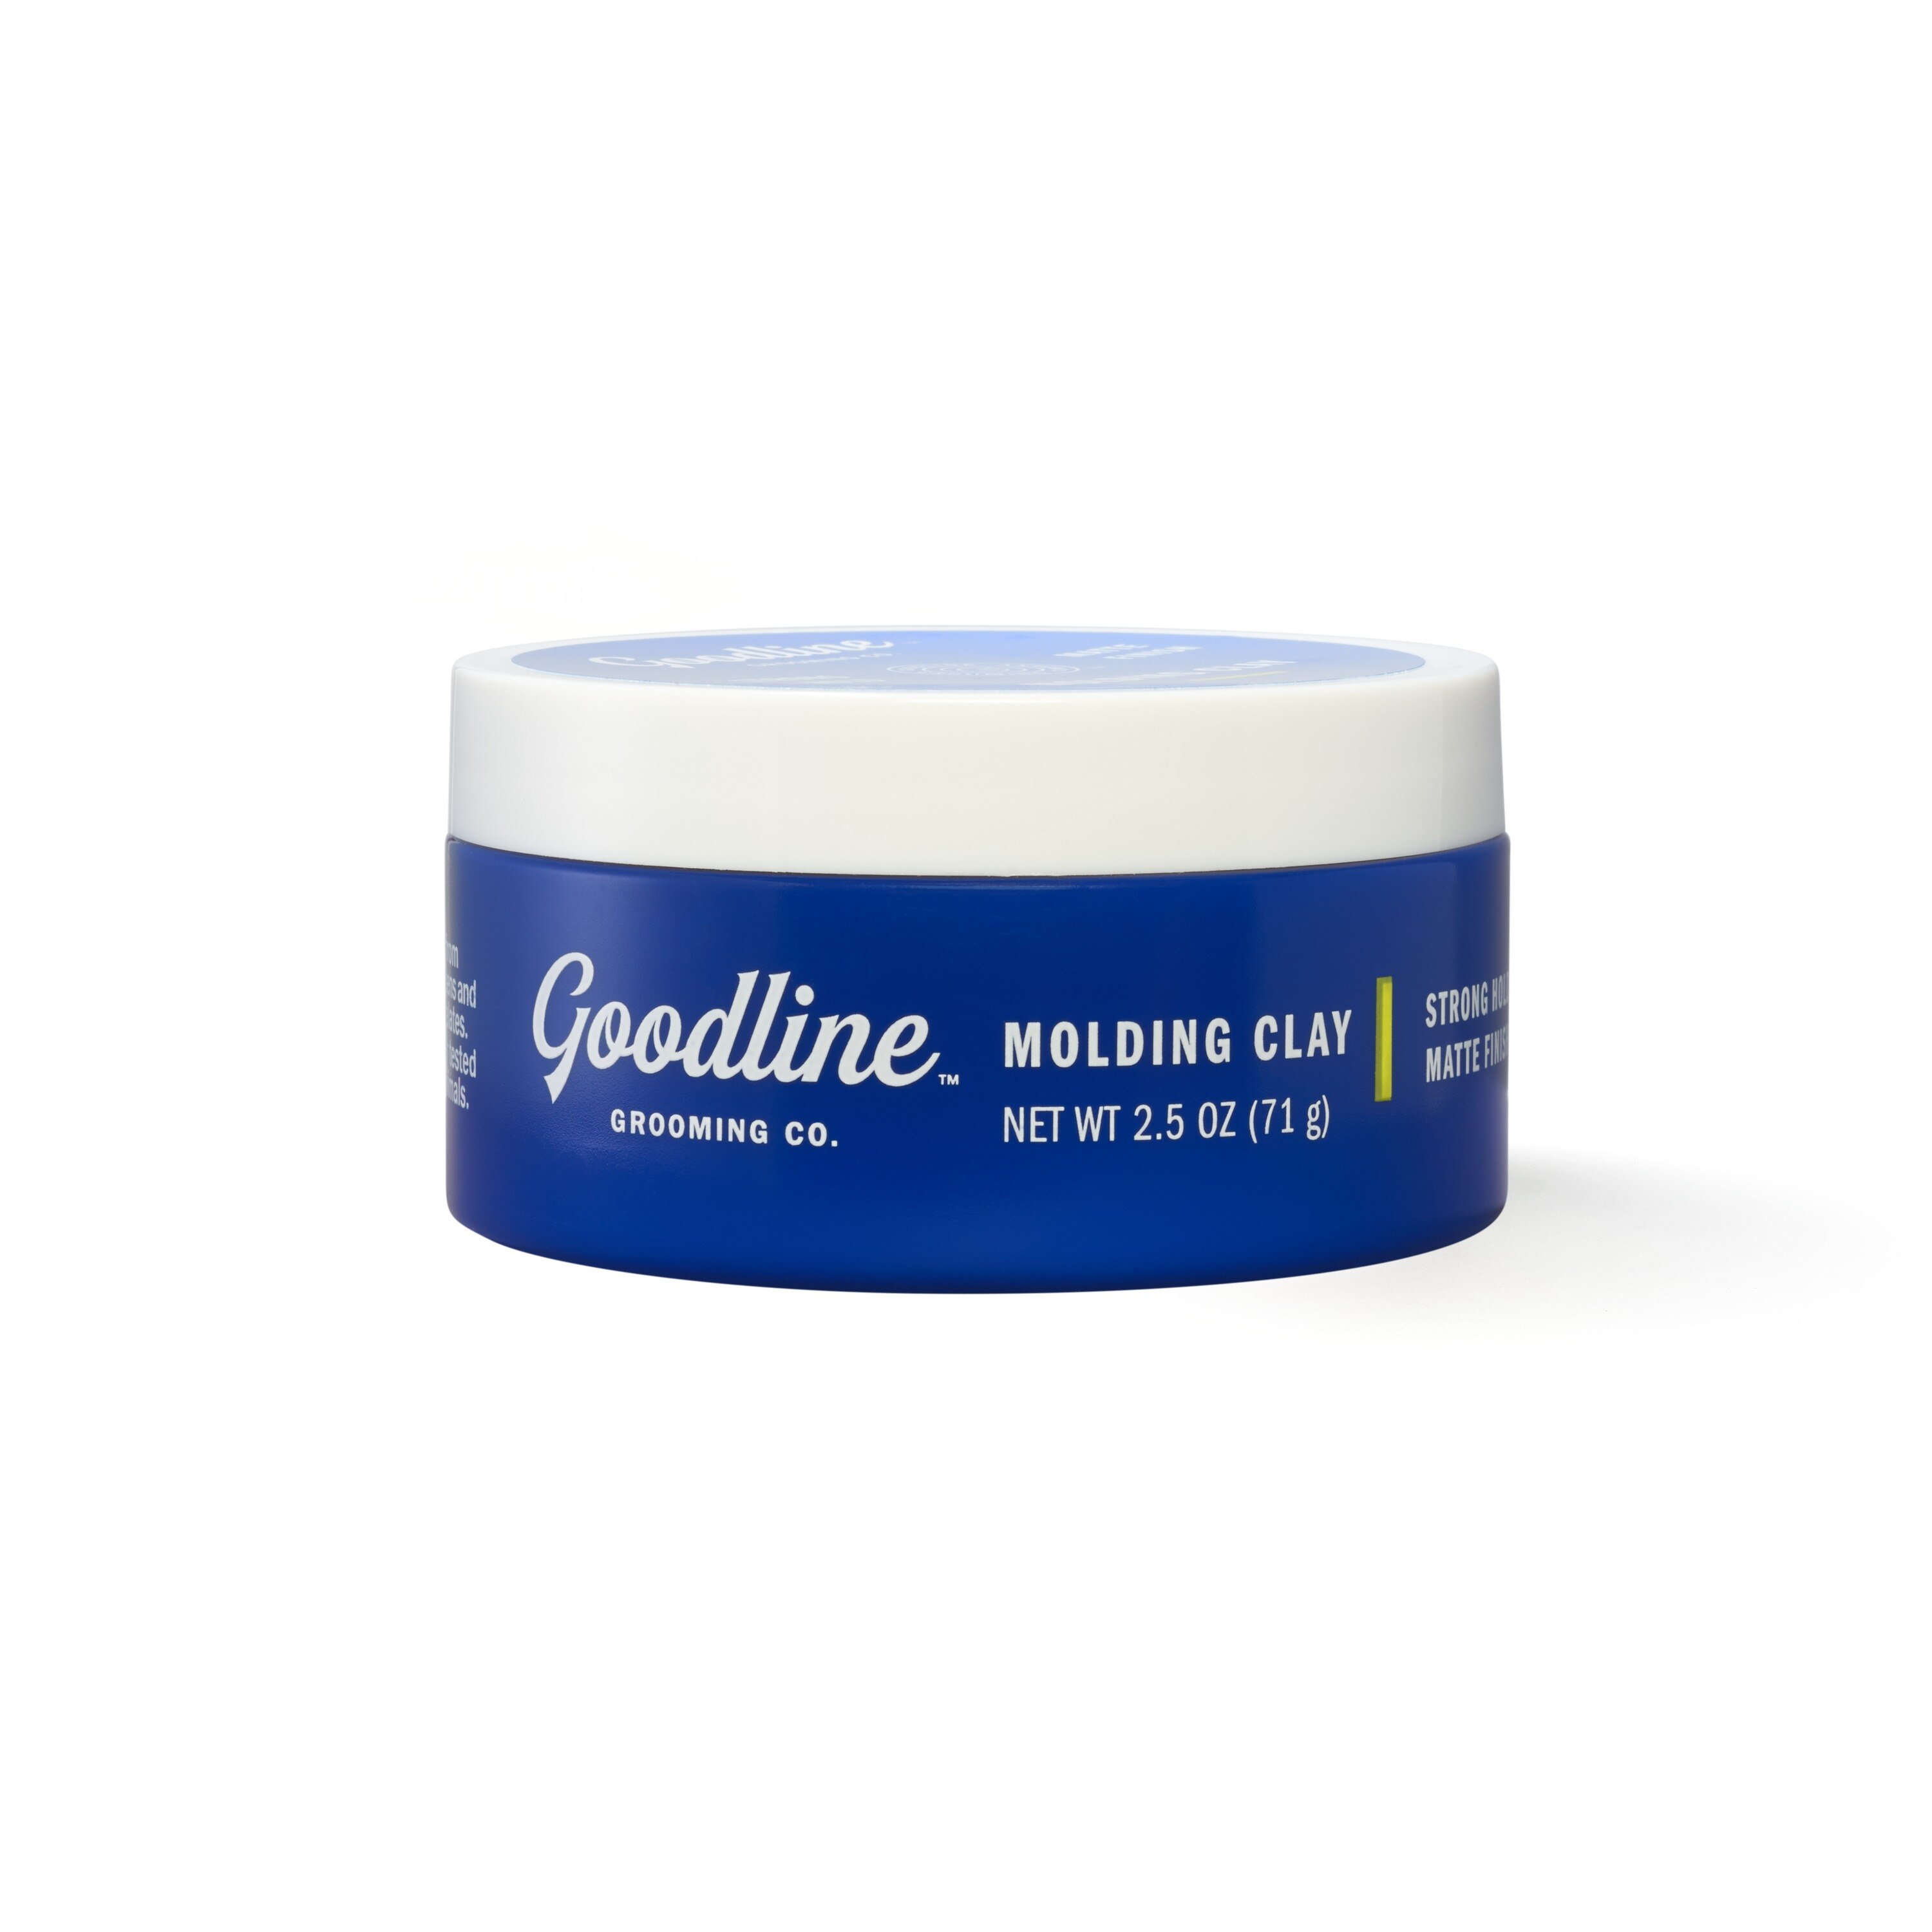 Goodline Grooming Co. Molding Clay, 2.5 OZ